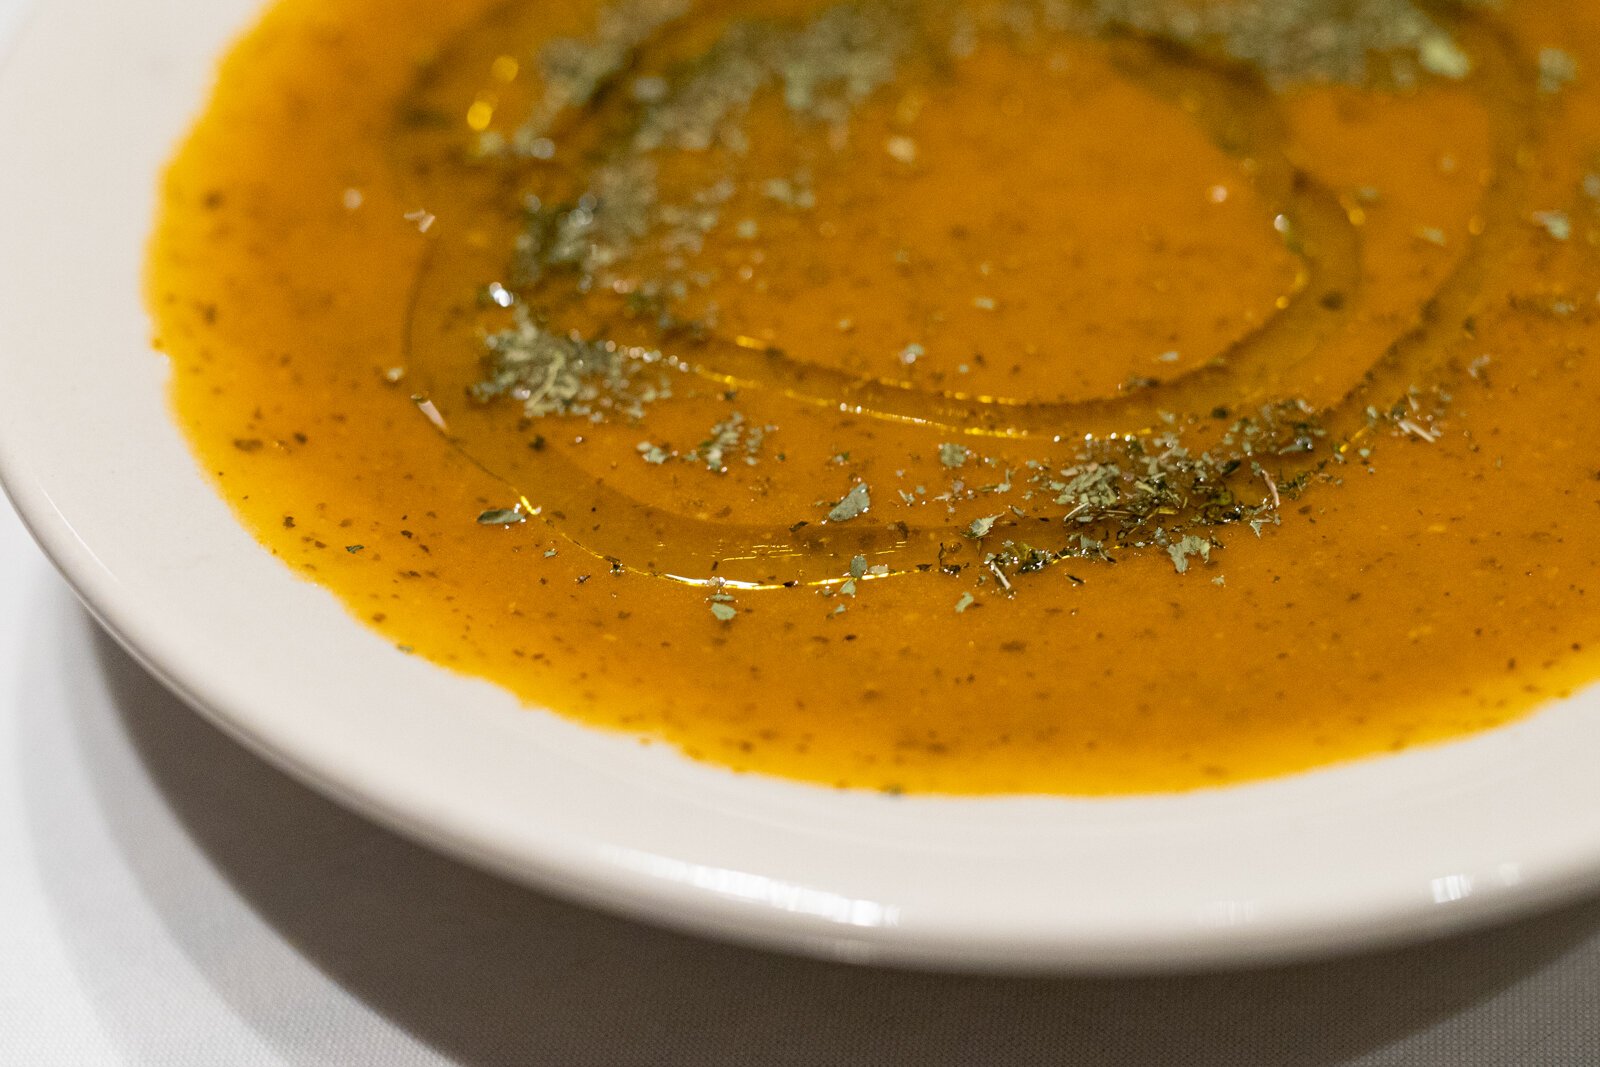 Between its burnt orange hue and the glossy sheen of olive oil laced around its surface, this vegetable soup is stunning to look at.